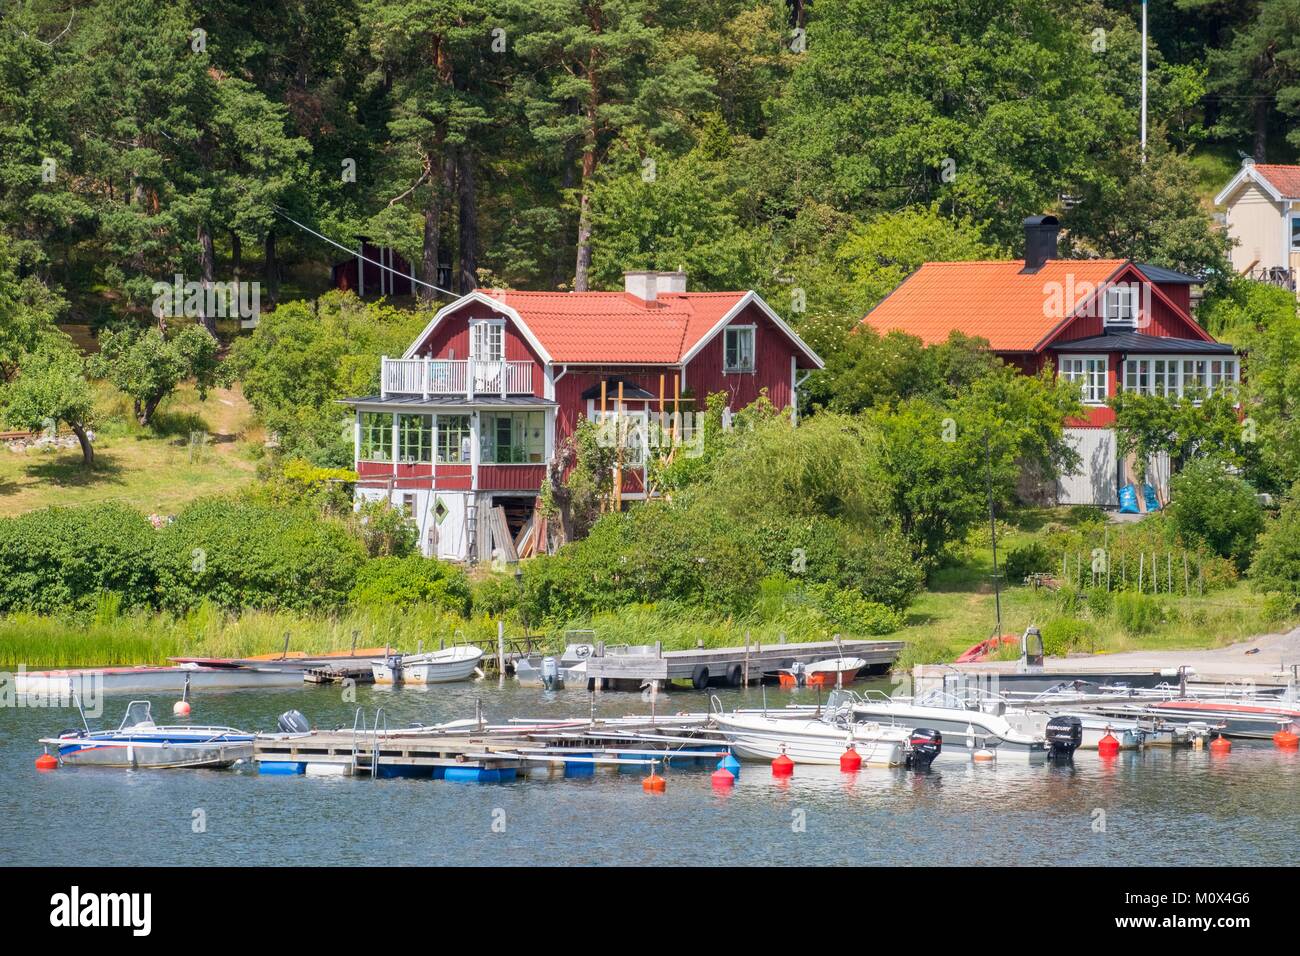 Sweden,Stockholm,Lidingo is an island located east of downtown Stockholm,secondary residences Stock Photo